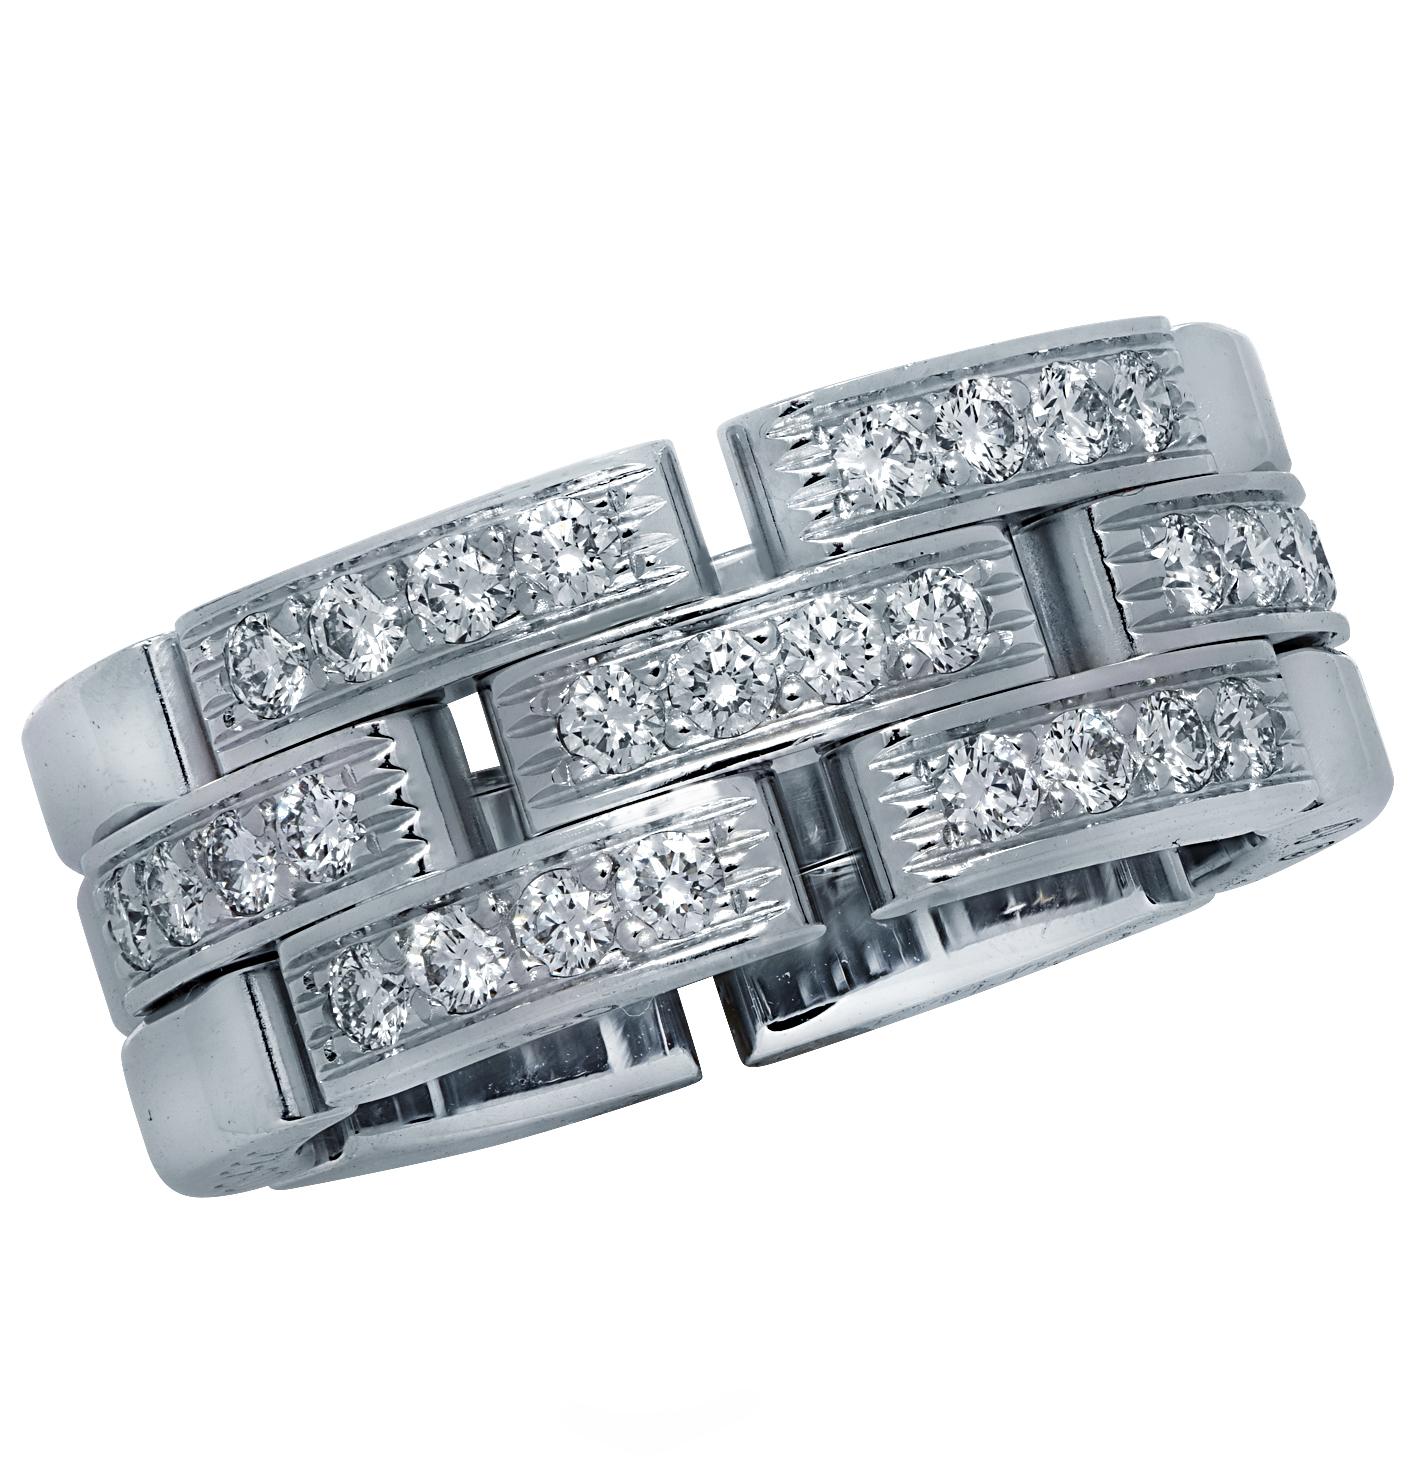 From the iconic house of Cartier, this spectacular Maillon Panthere diamond wedding band is expertly crafted in 18 karat white gold, and features 28 round brilliant cut diamonds weighing approximately .60 carats total, F color, VVS clarity. This